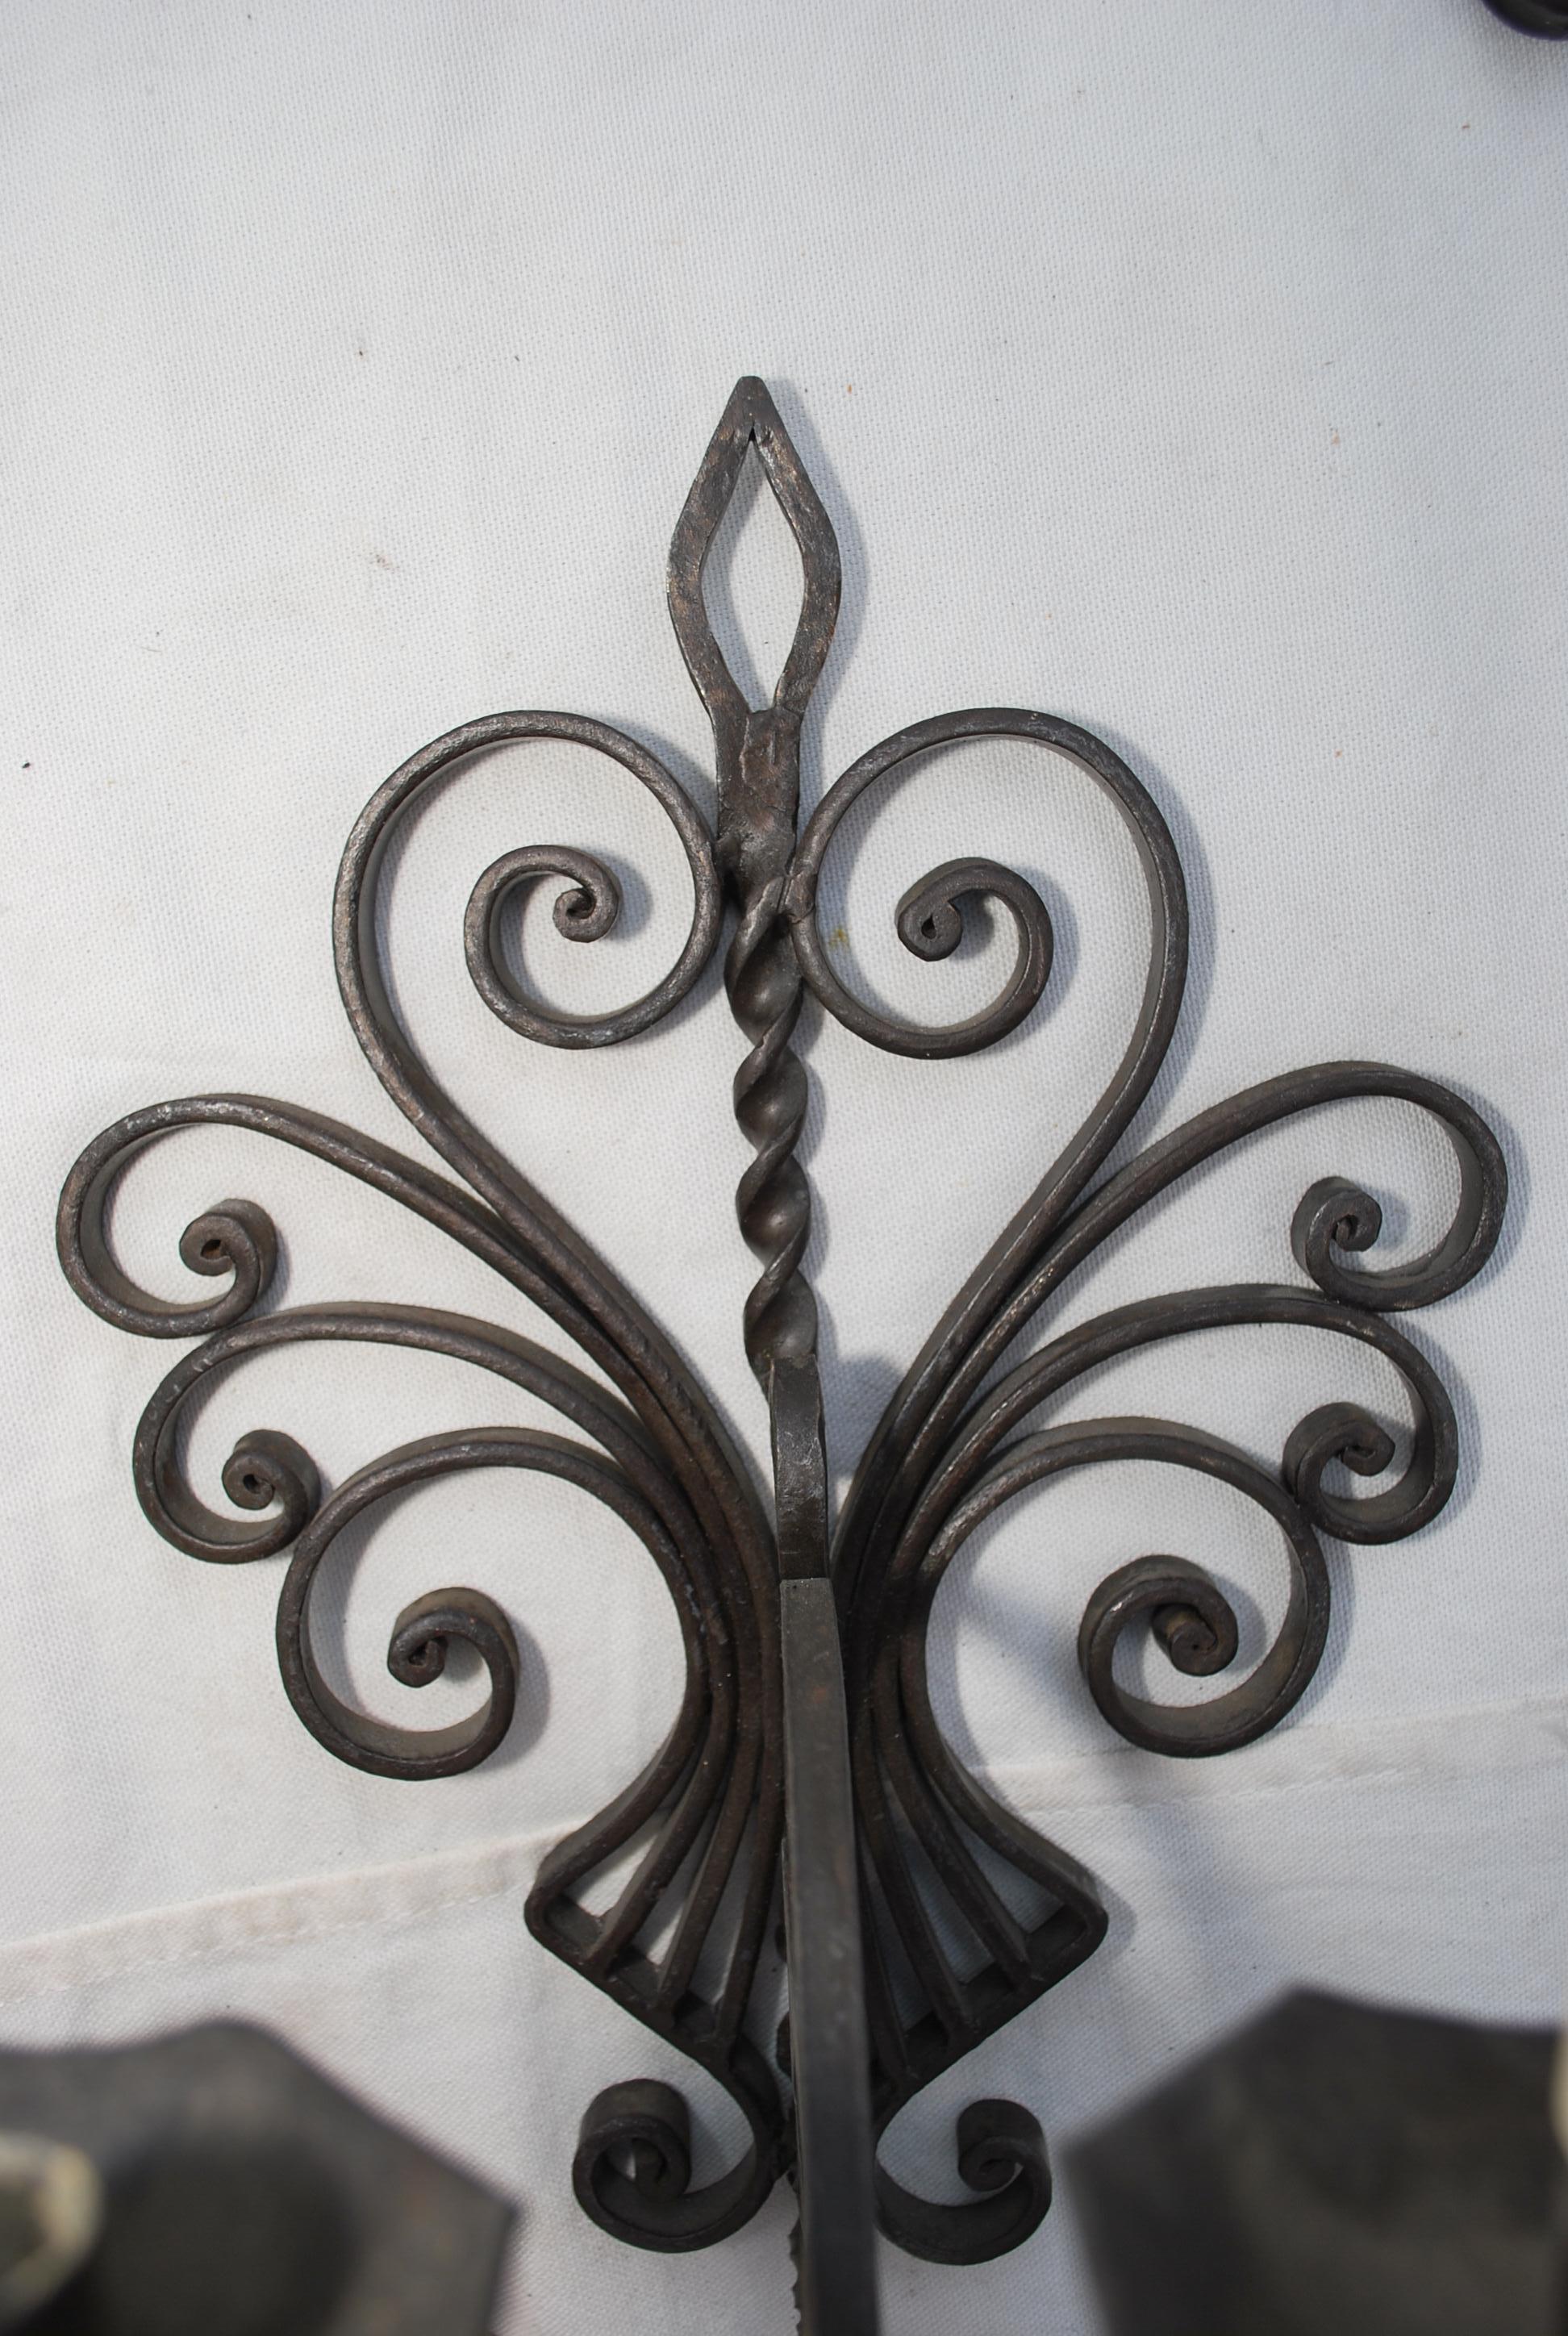 An elegant pair of wrought iron sconces, the patina is so much nicer in person, these sconces are black, the flash of the camera kind of distorted  the true color of the metal